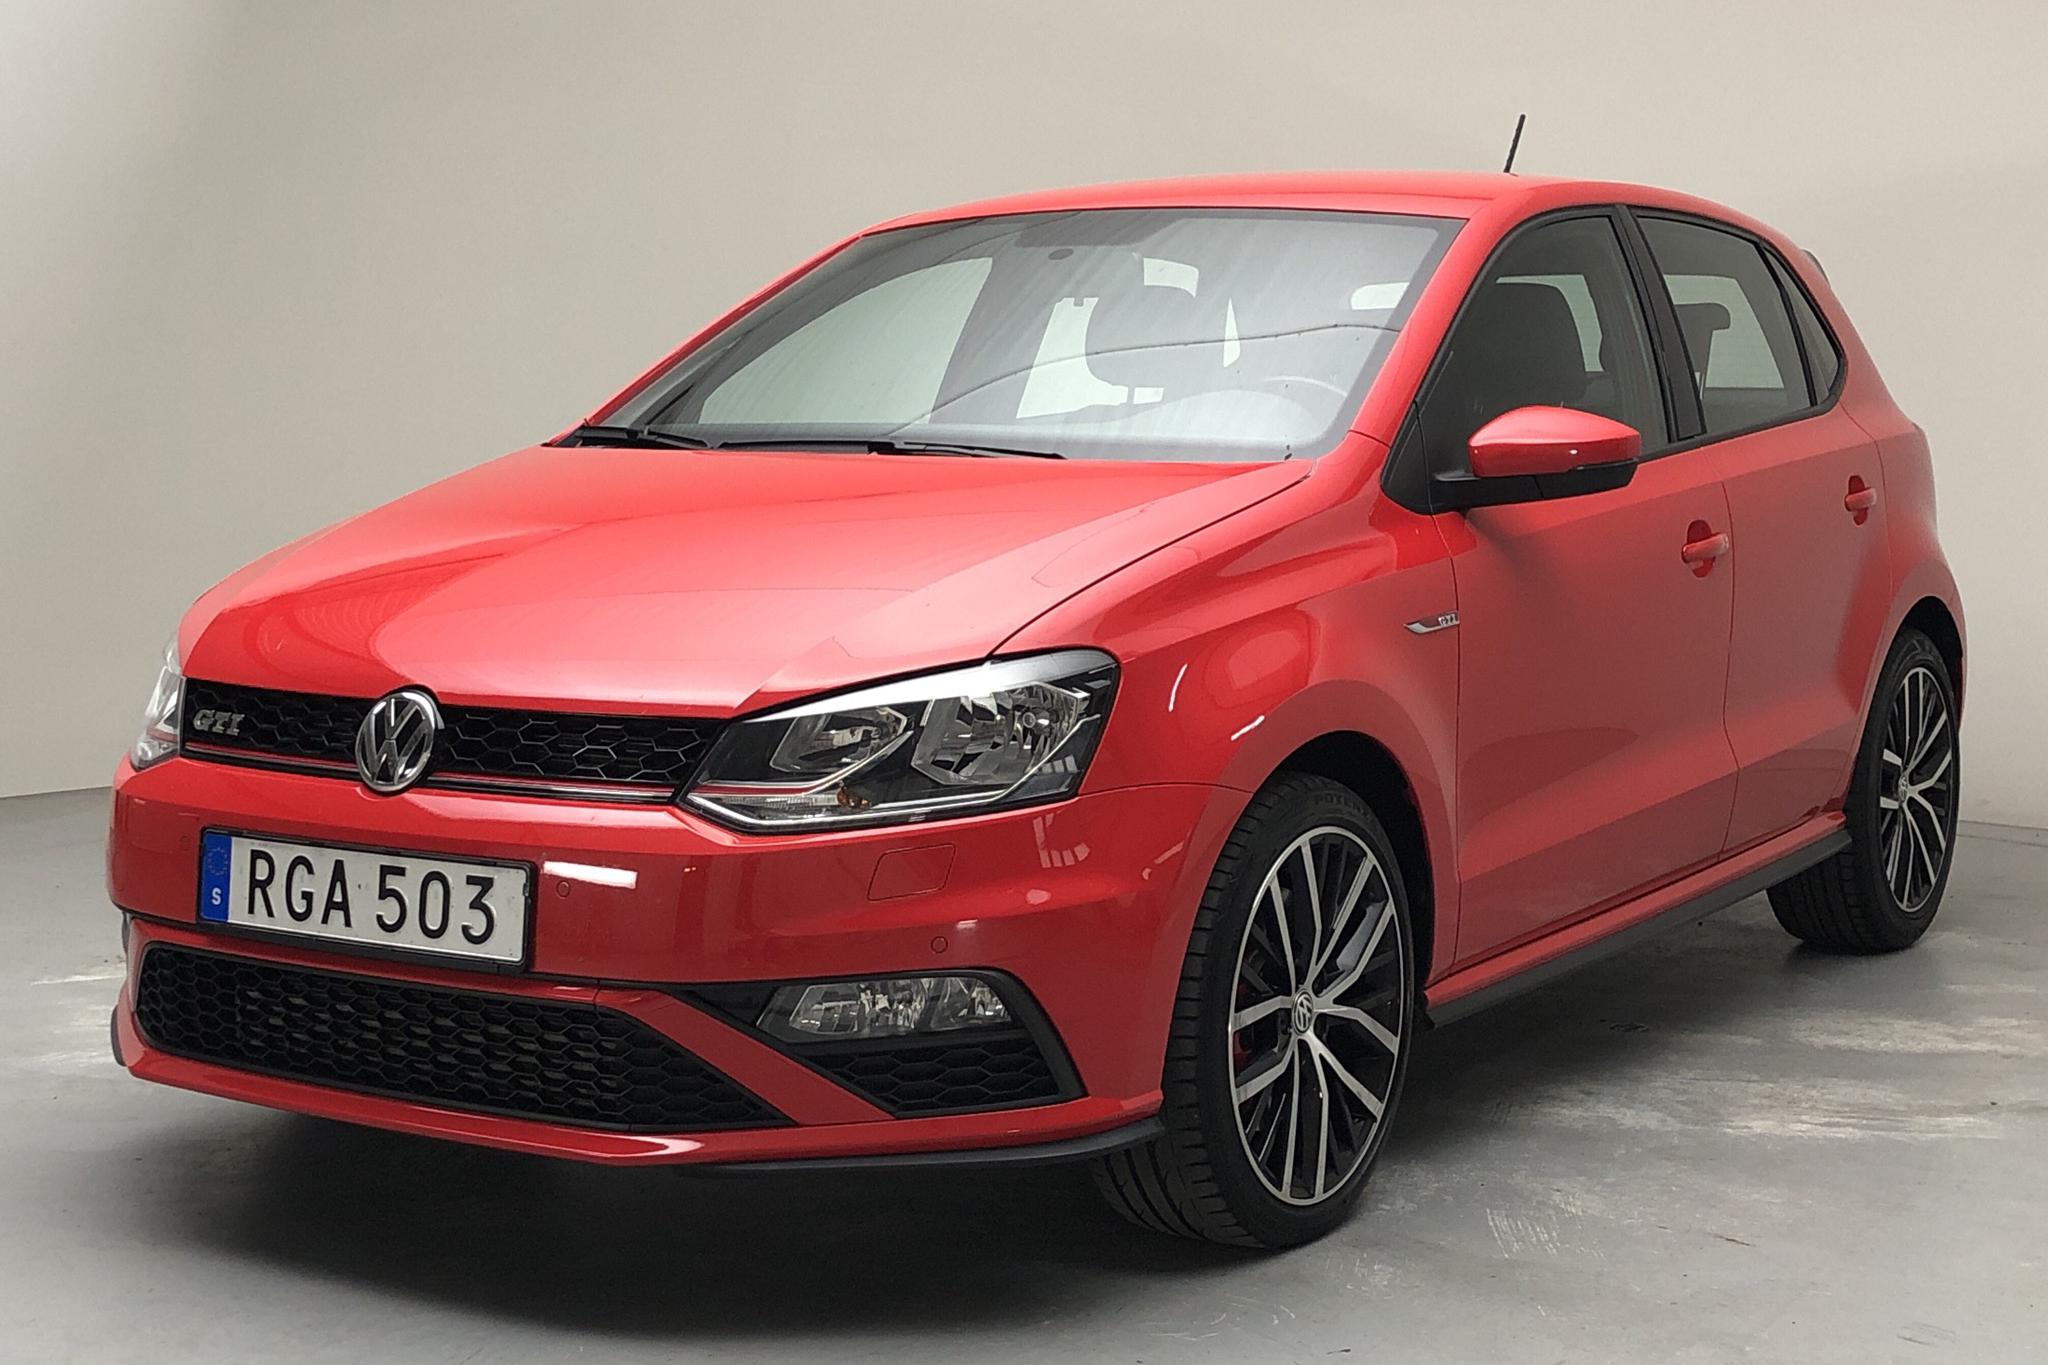 VW Polo 1.8 GTI 5dr (192hk) - 25 030 km - Automatic - red - 2017